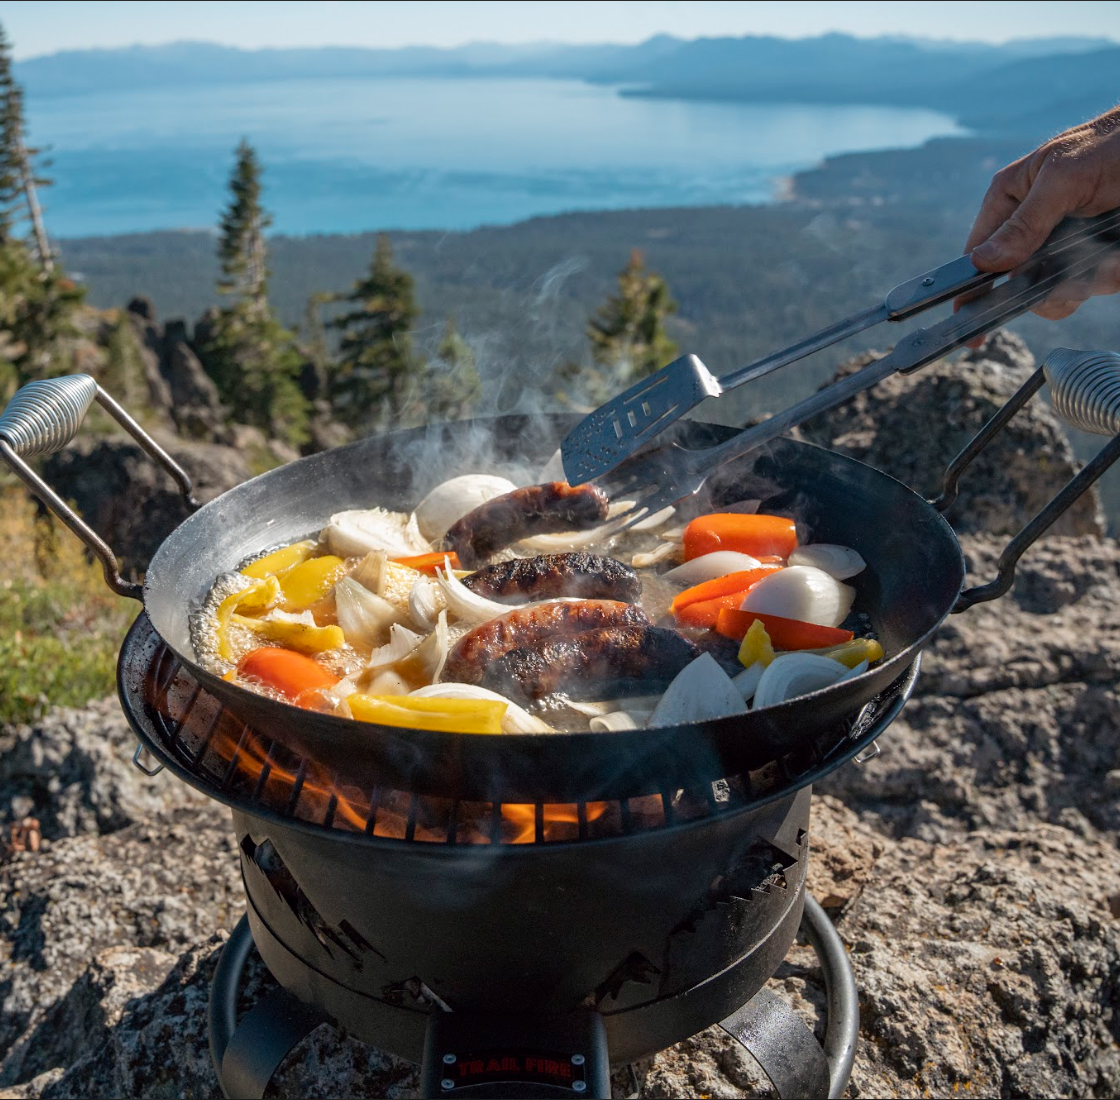 image that shows using the Trail Fire Grill in its Wok Mode cooking up vegetables and sausage with a view